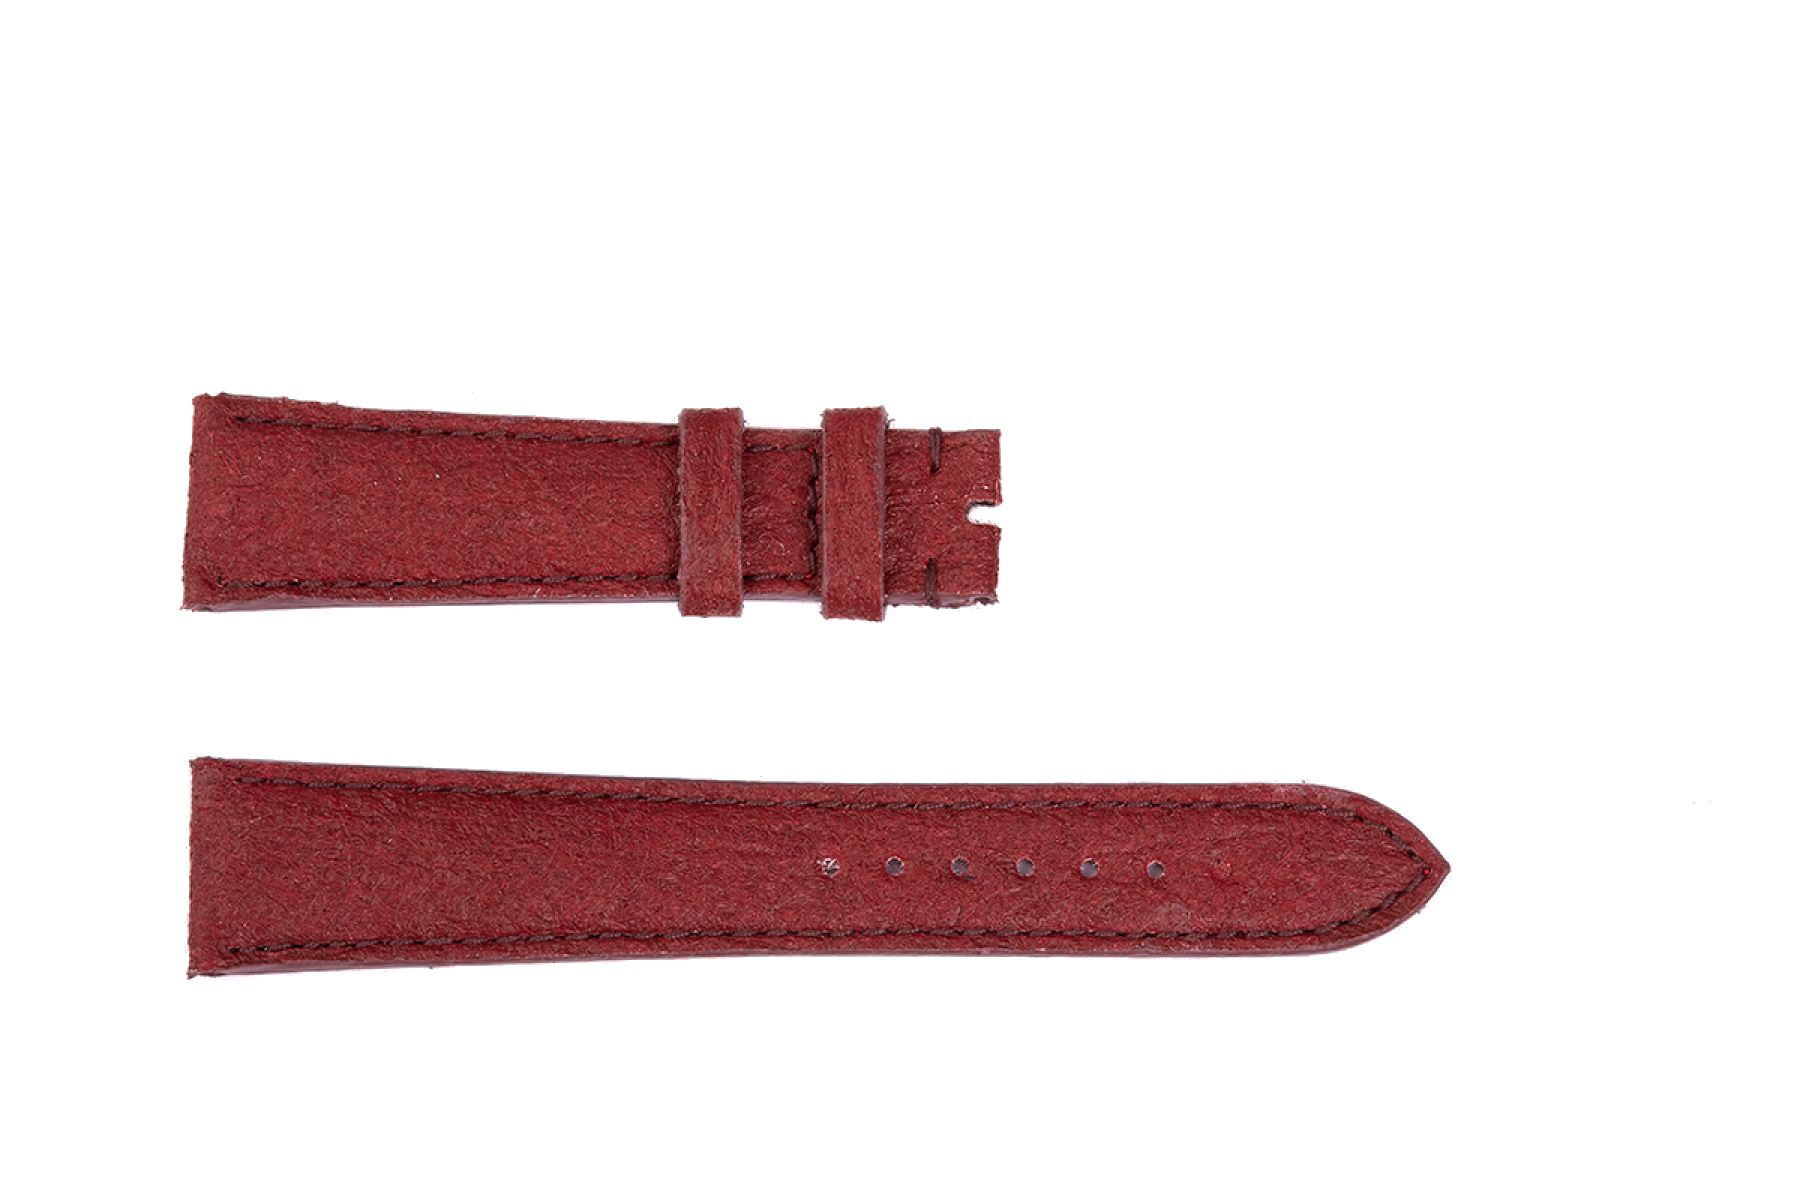 Mulberry Bordeaux Pinatex Strap 16mm, 18mm, 19mm, 20mm, 21mm, 22mm General style